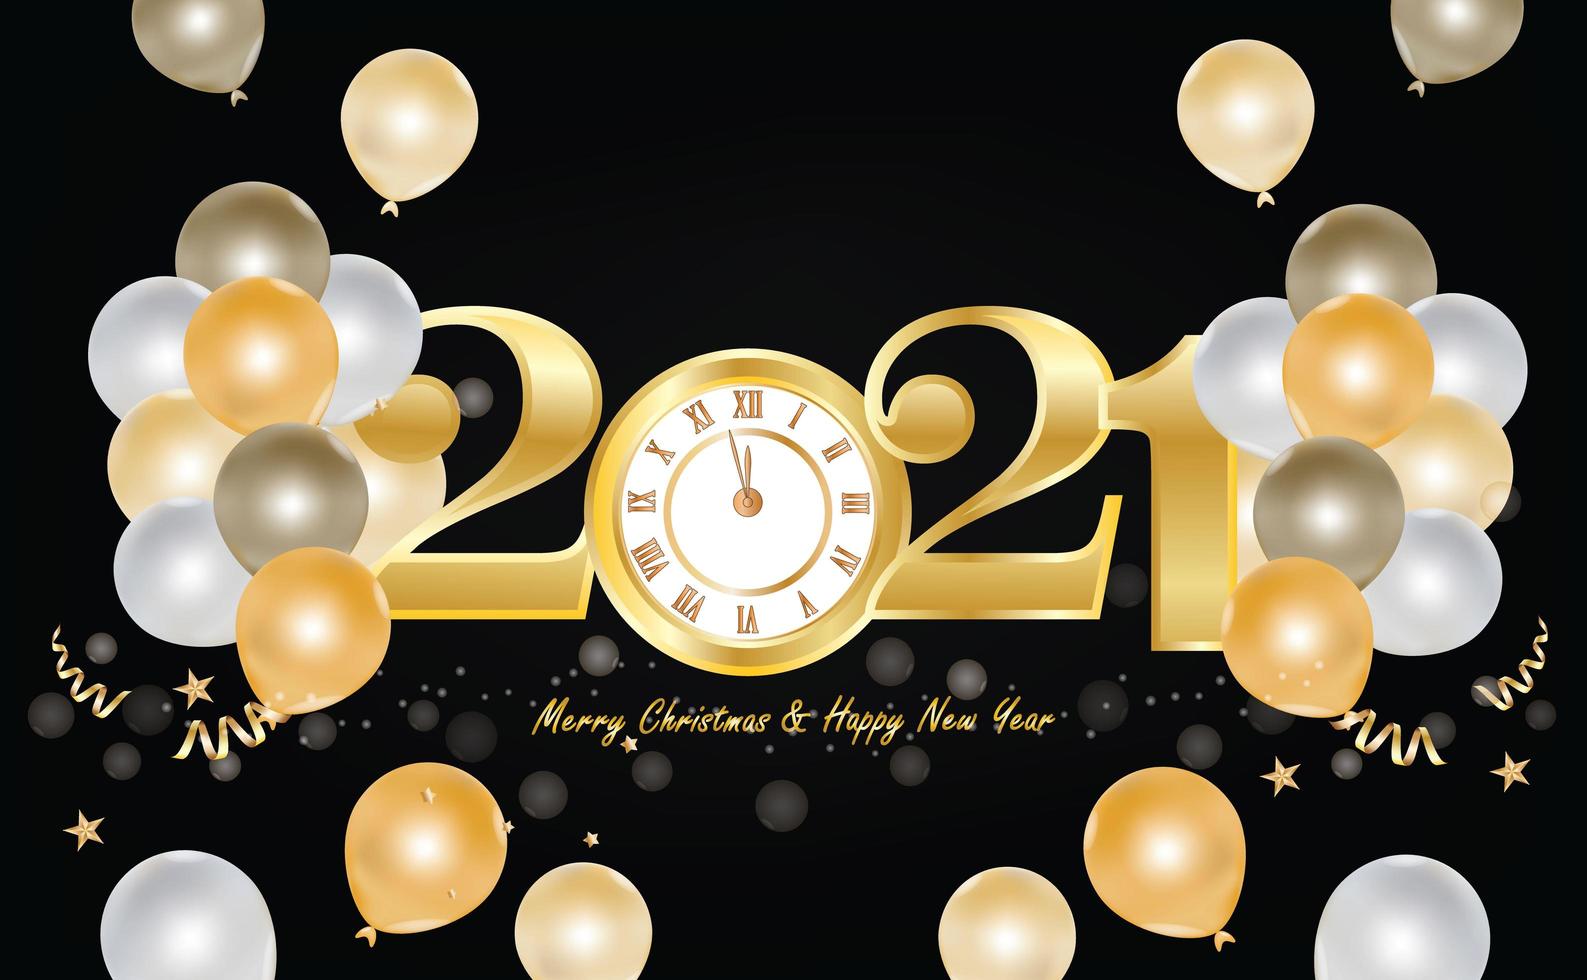 Happy New Year 2021 design with gold clock and ballons vector